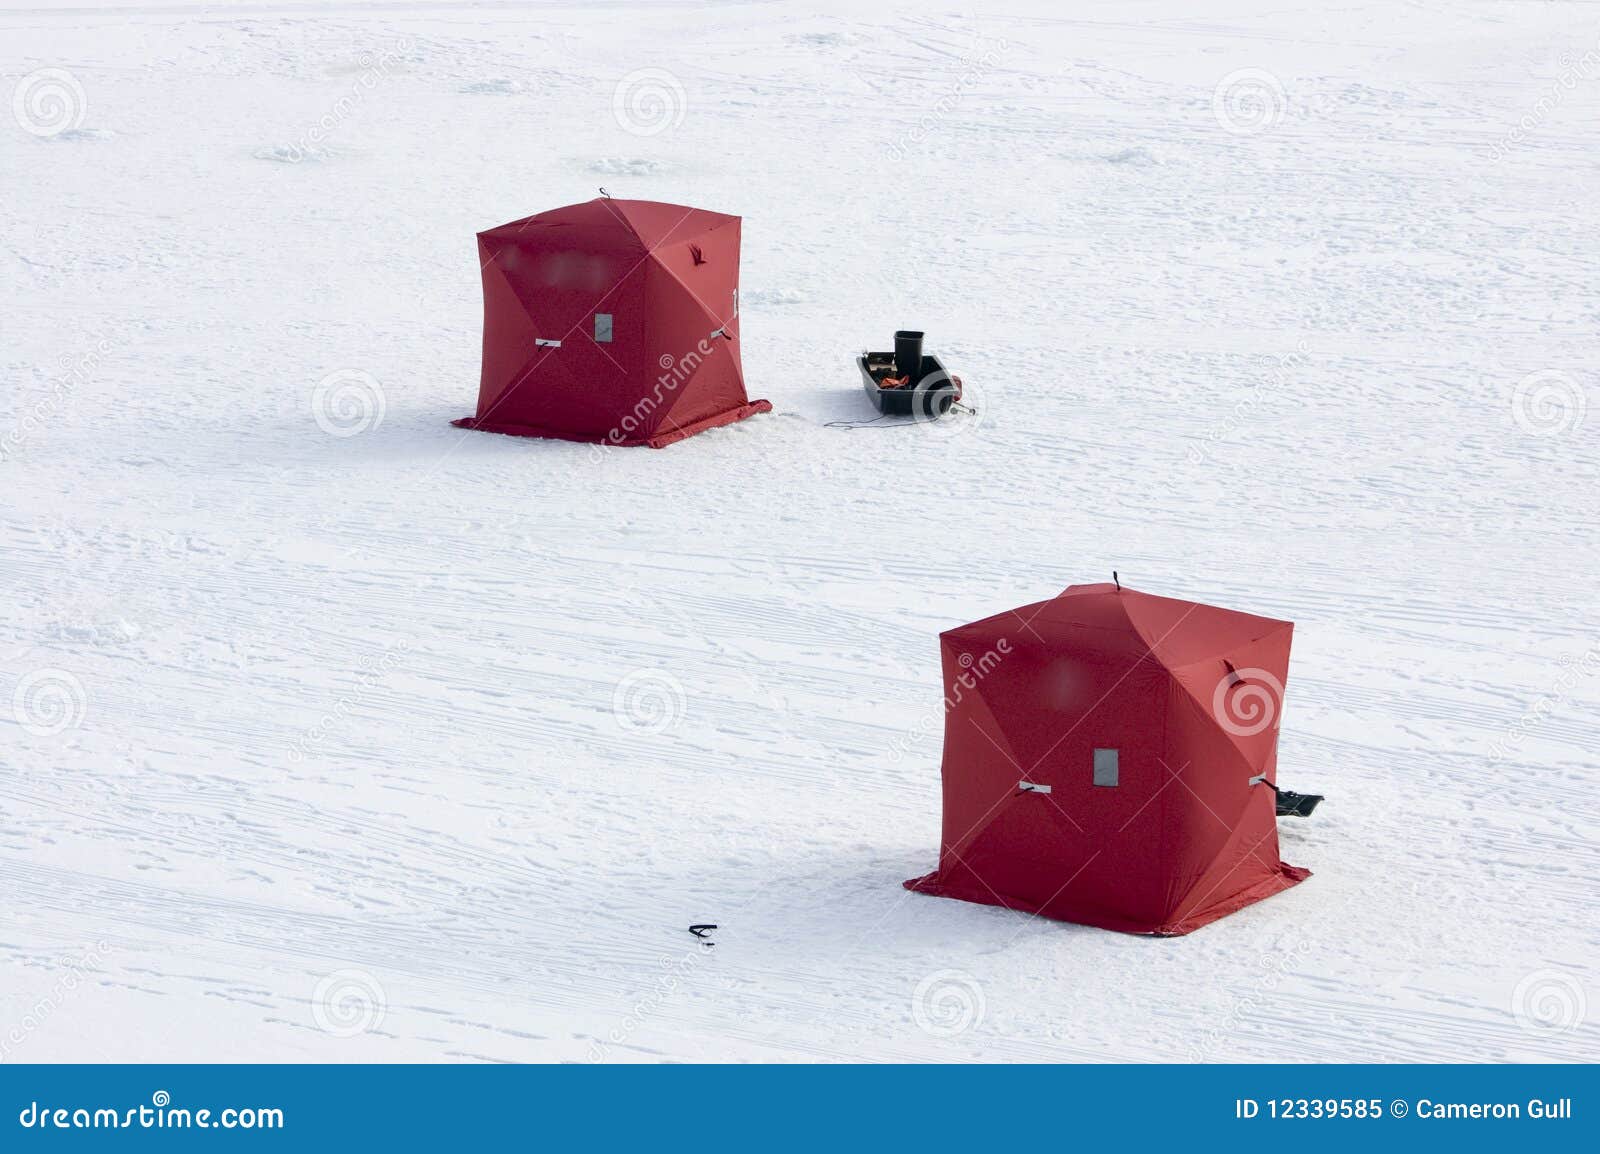 Two Ice Fishing Tents on Frozen Lake Stock Image - Image of tents